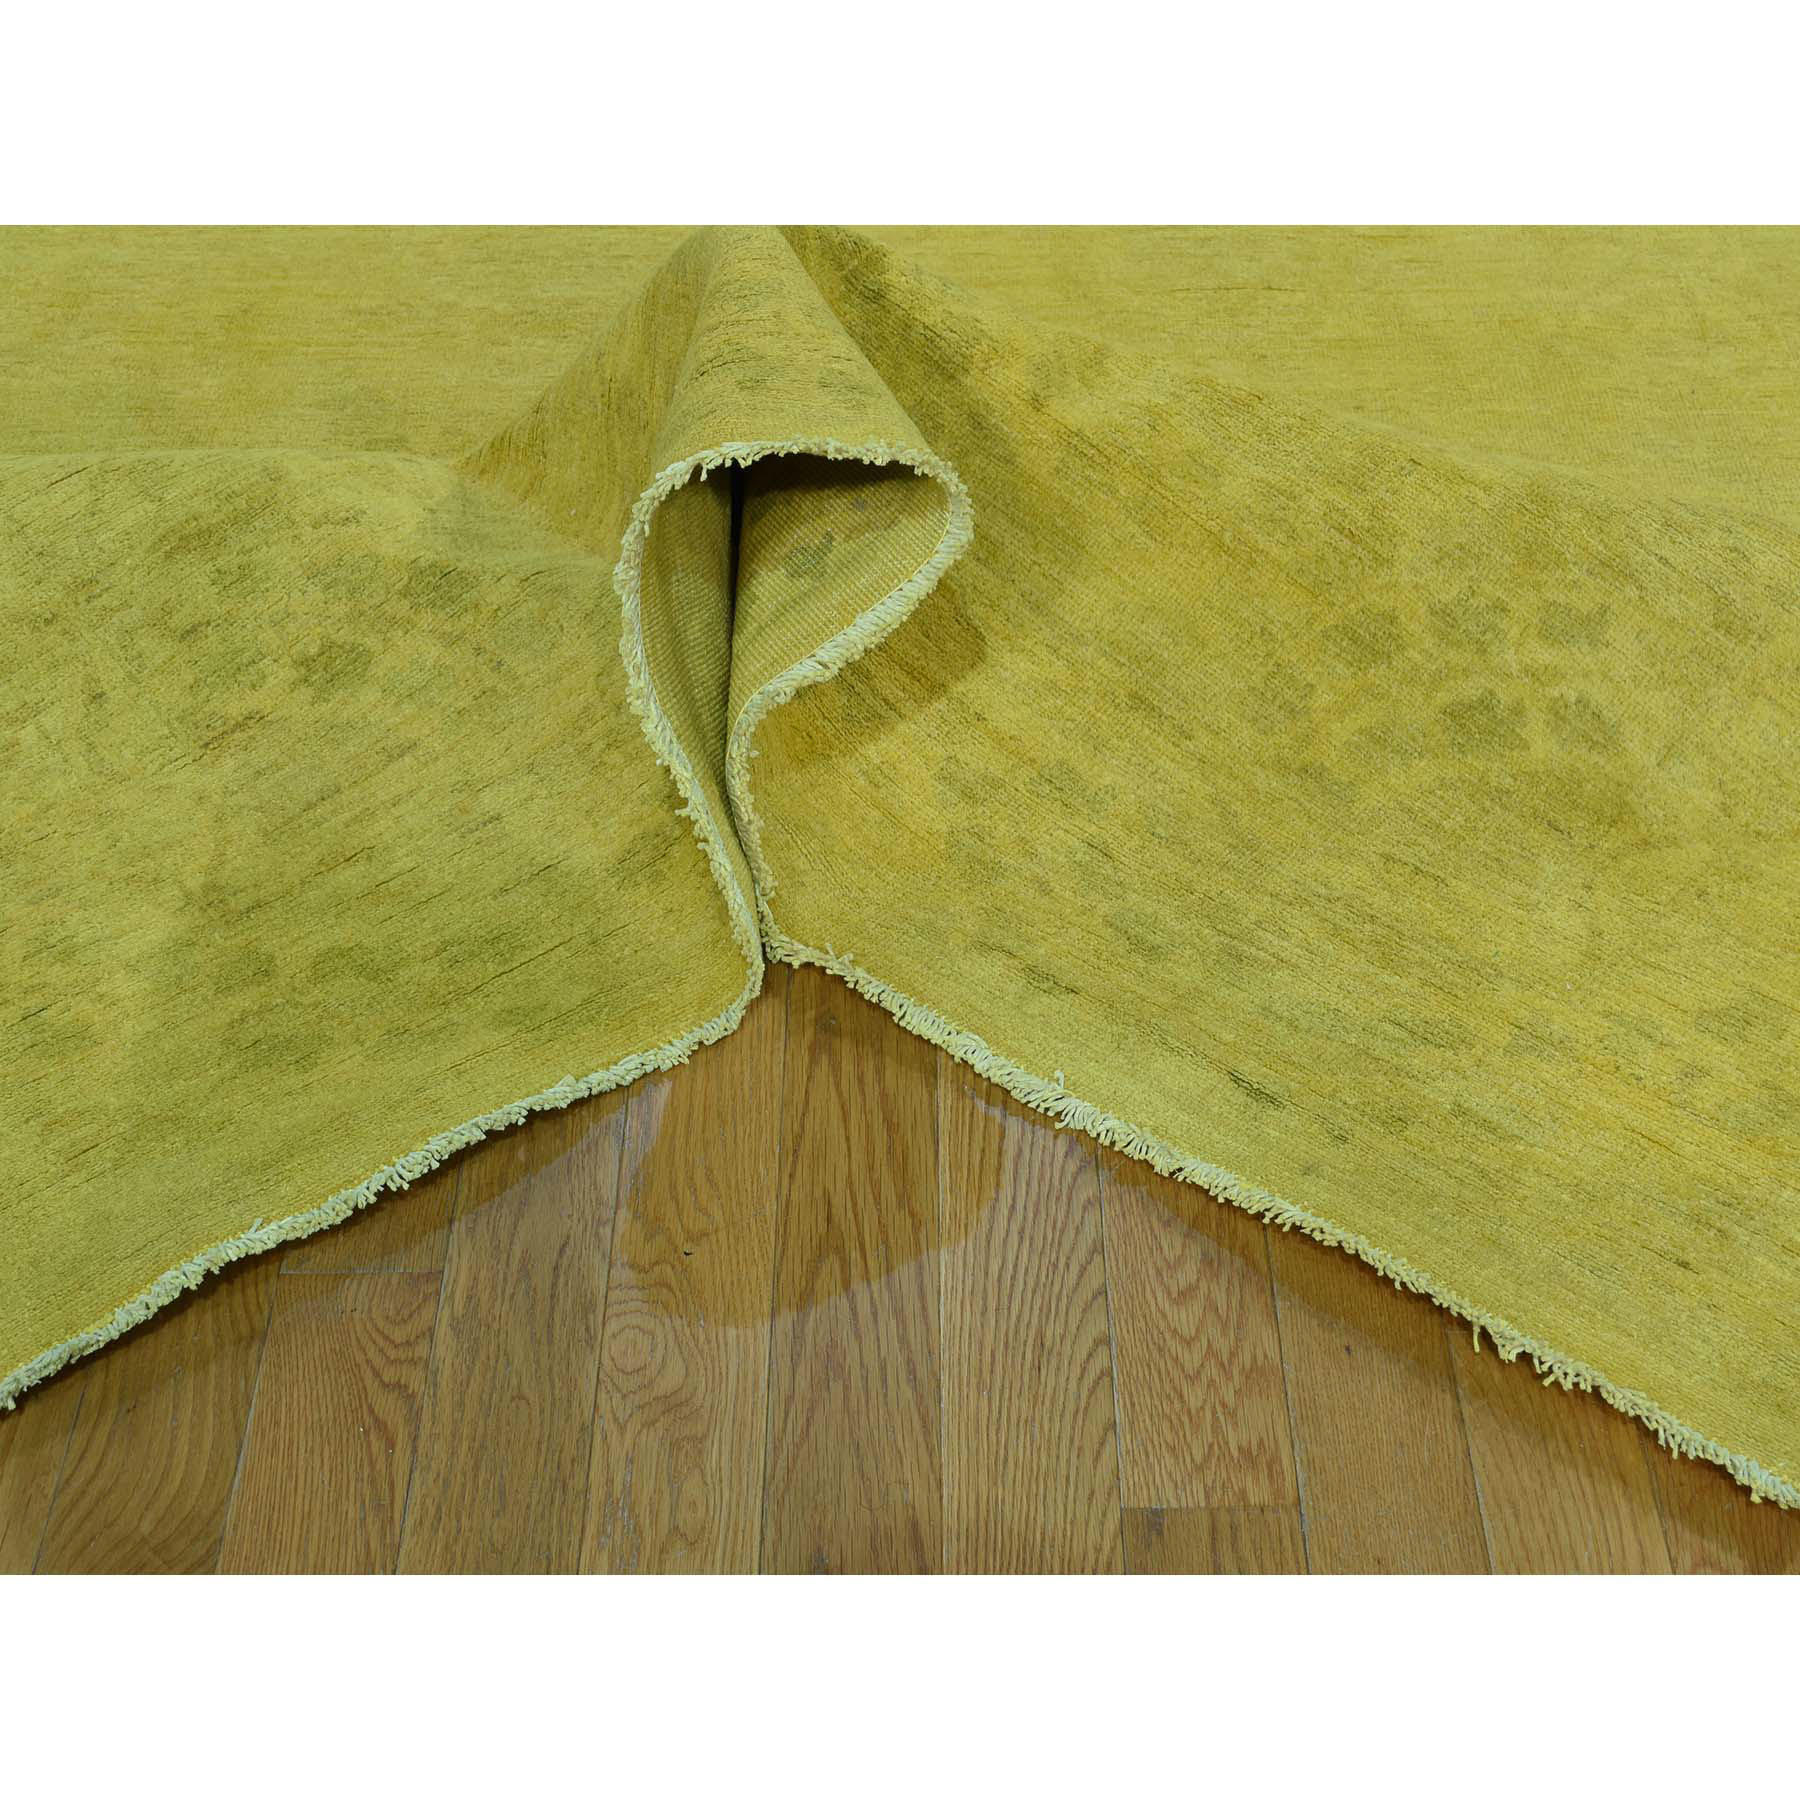 6-2 x9- Yellow Hand-Knotted Overdyed Peshawar 100 Percent Wool Oriental Rug 